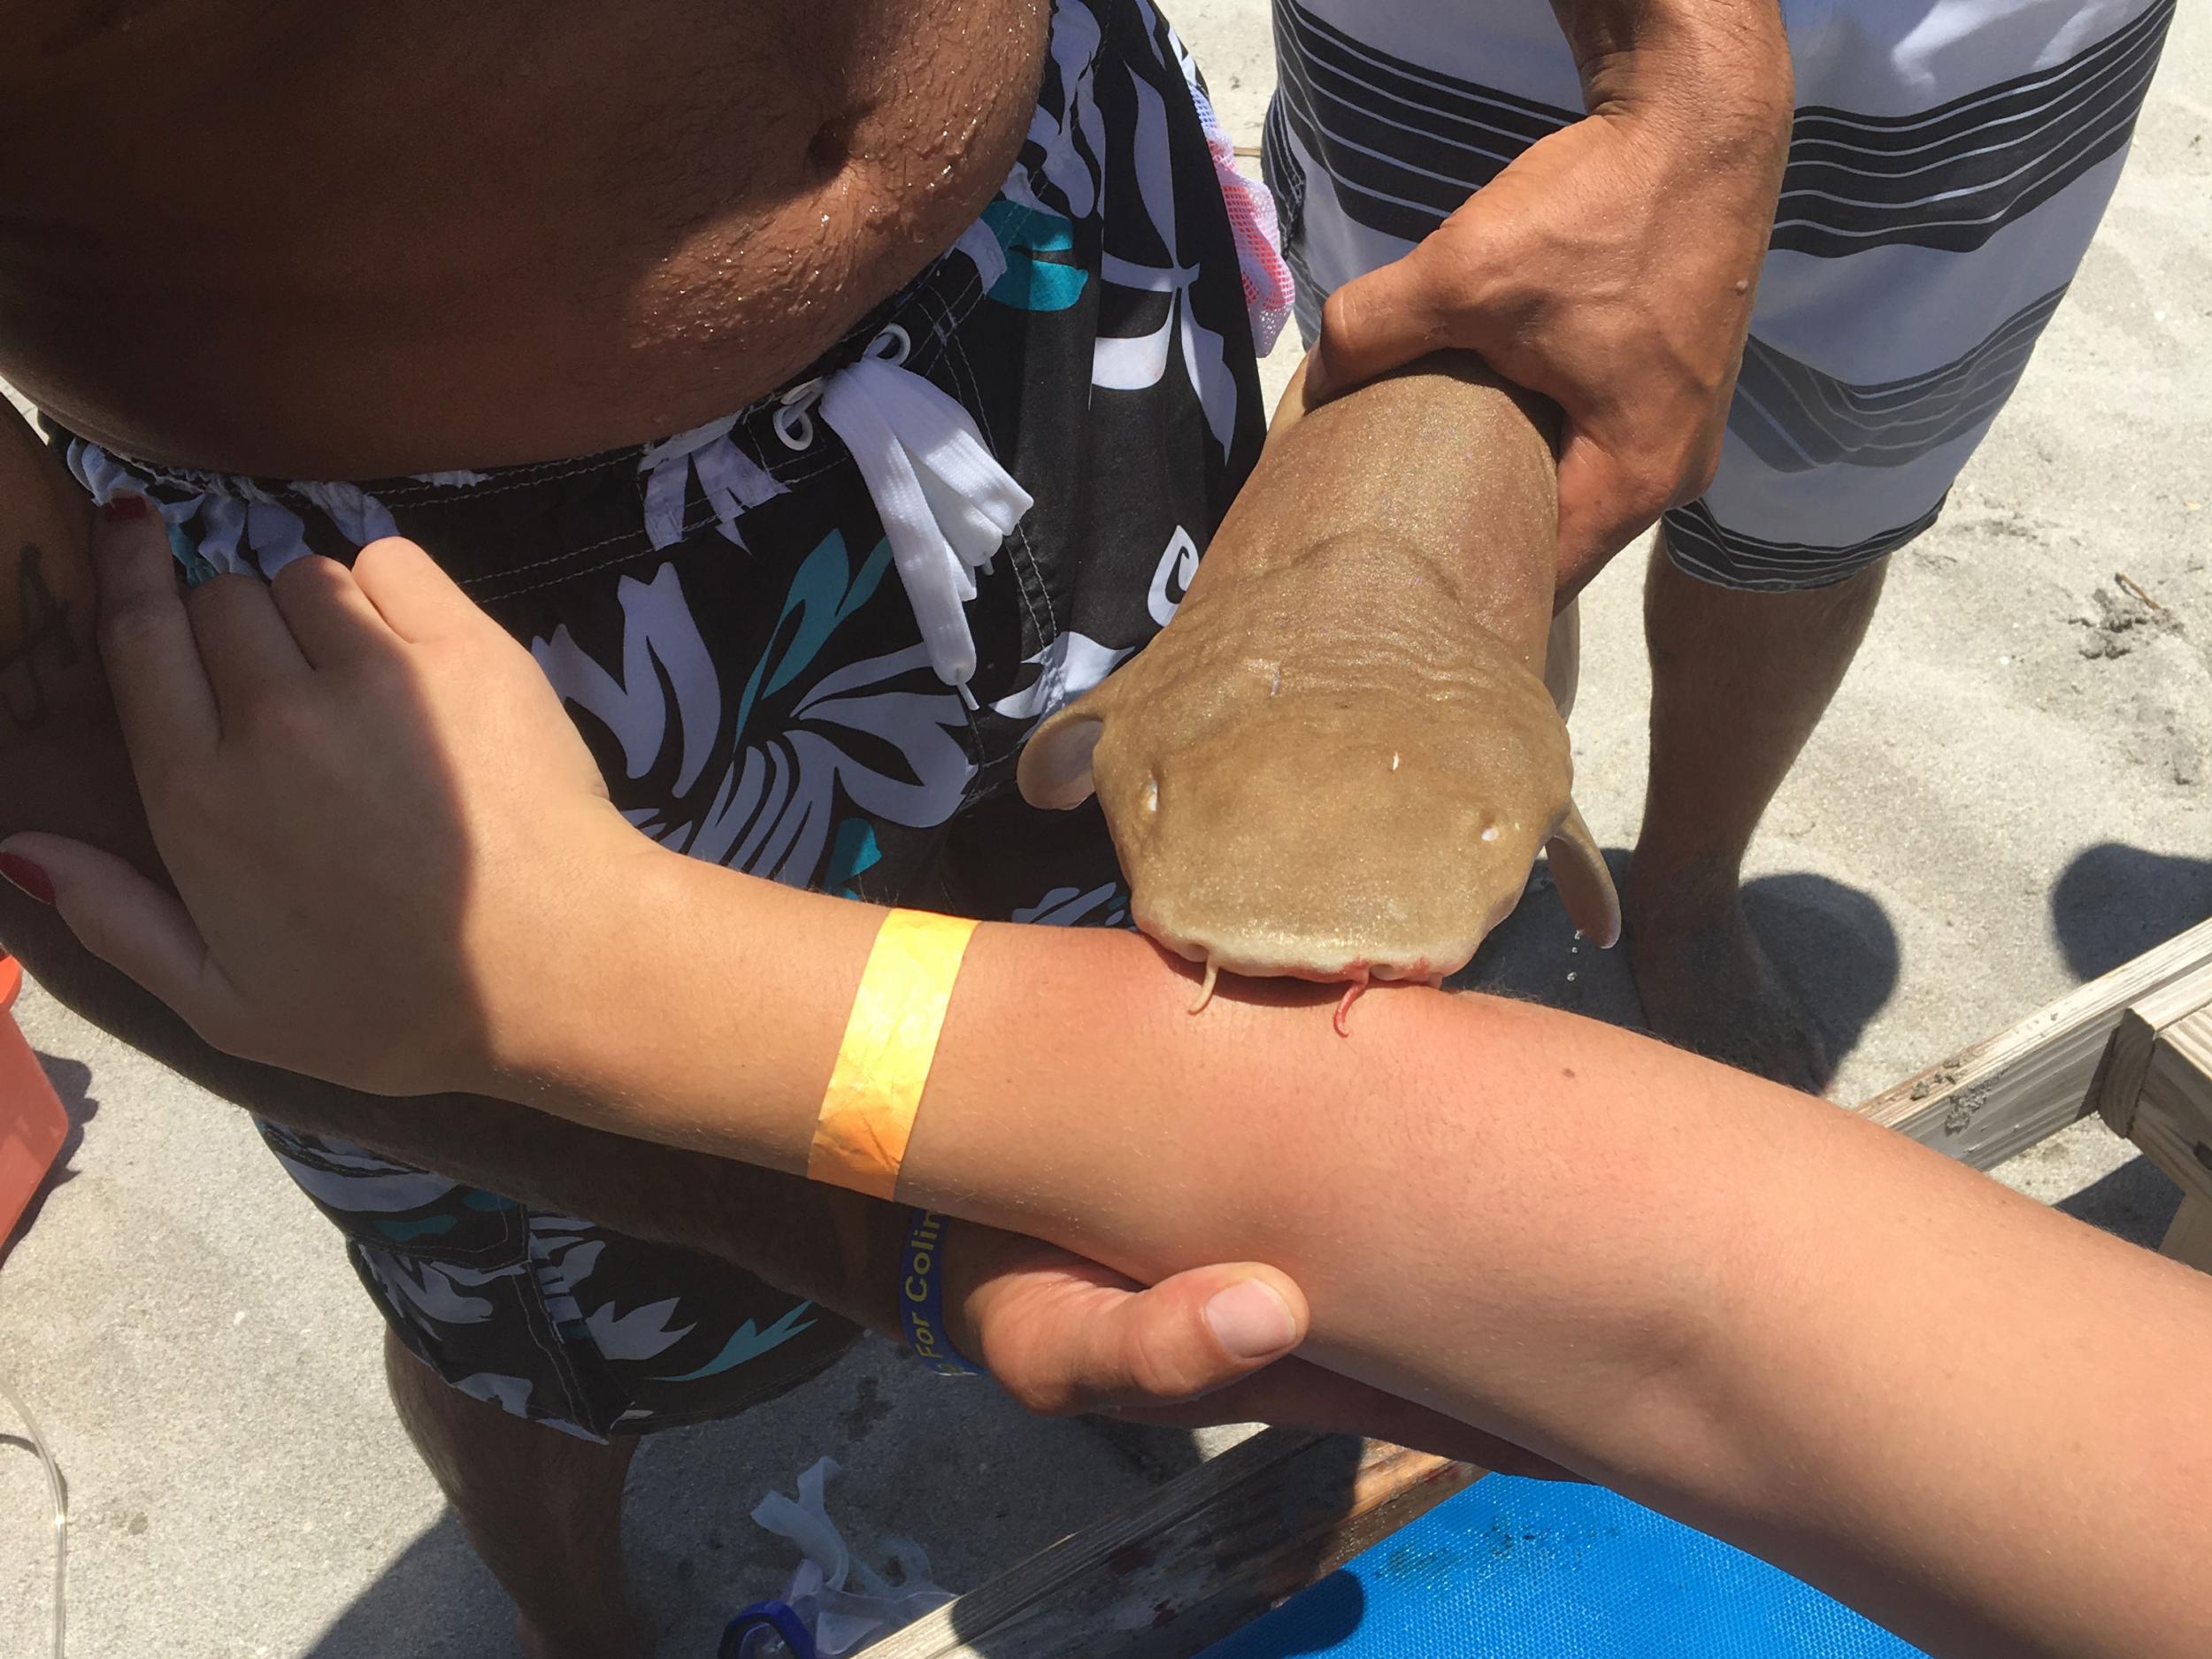 The shark would not let go of her arm, even after it died